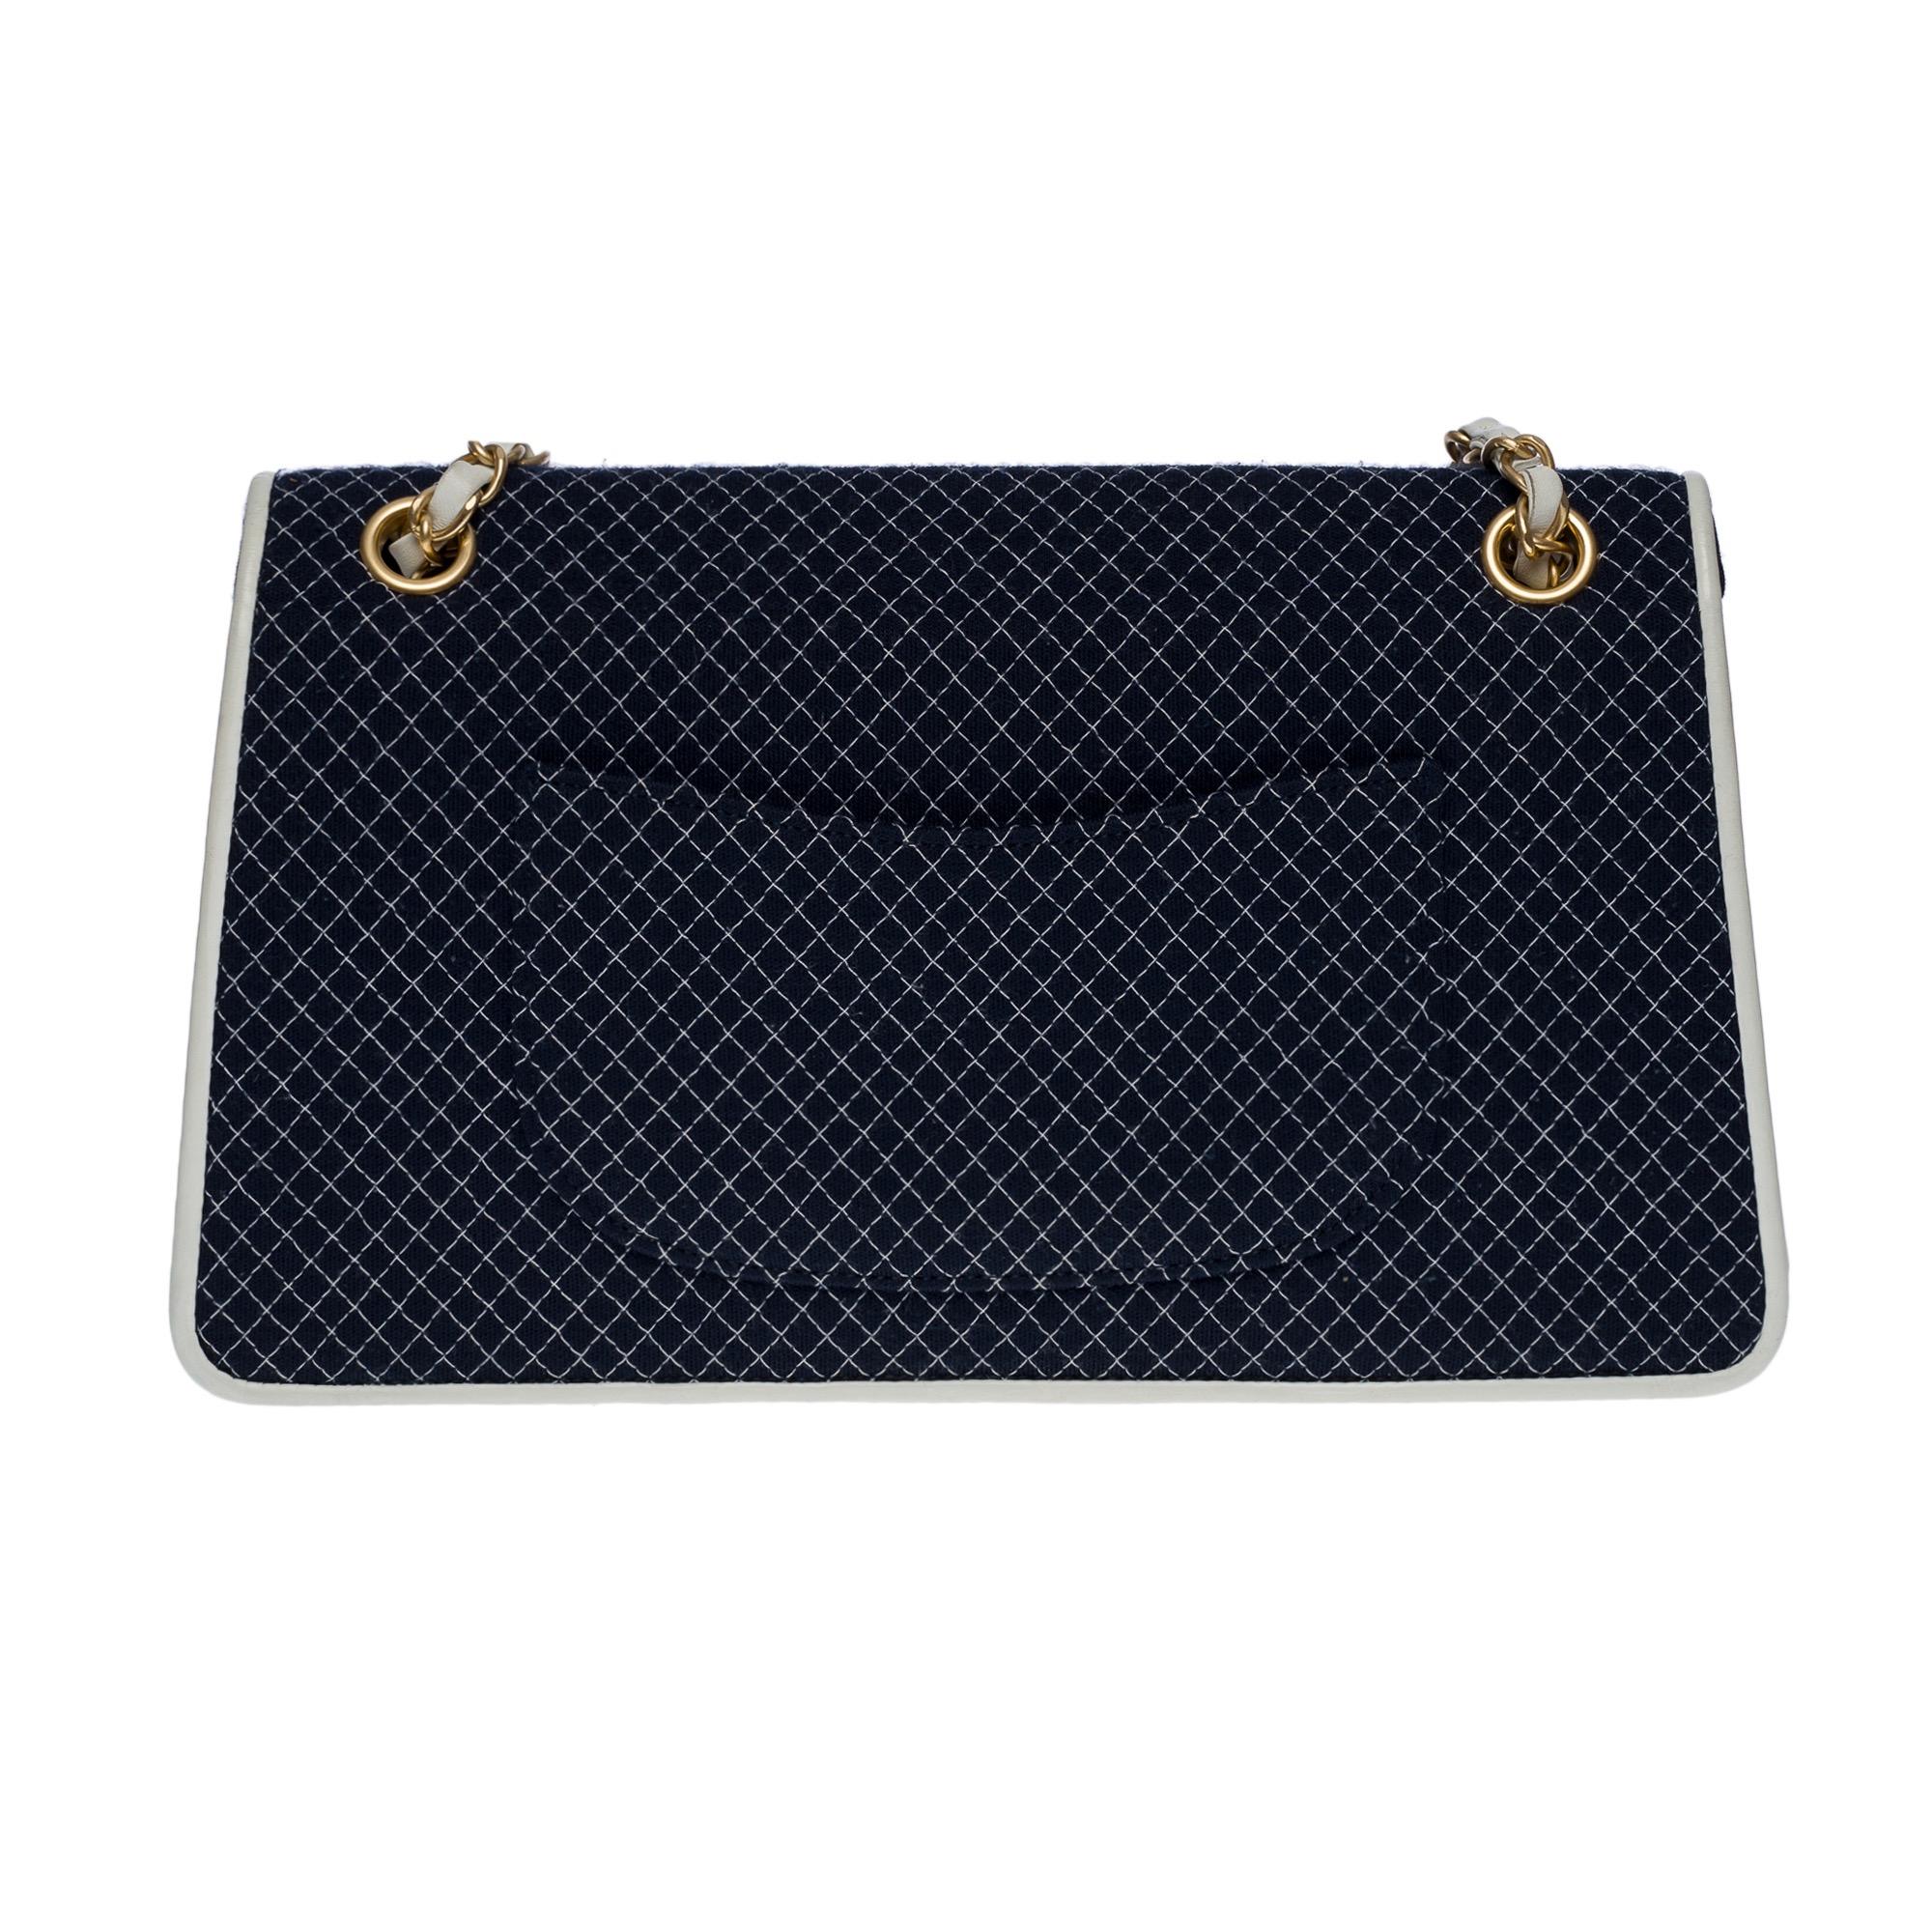 Sublime and rare Chanel Timeless/Classic shoulder bag in navy blue jersey with white rhombus overlay and beige patent leather, matte gold hardware, matte gold chain handle interlaced with white leather allowing a shoulder and shoulder strap
Backpack